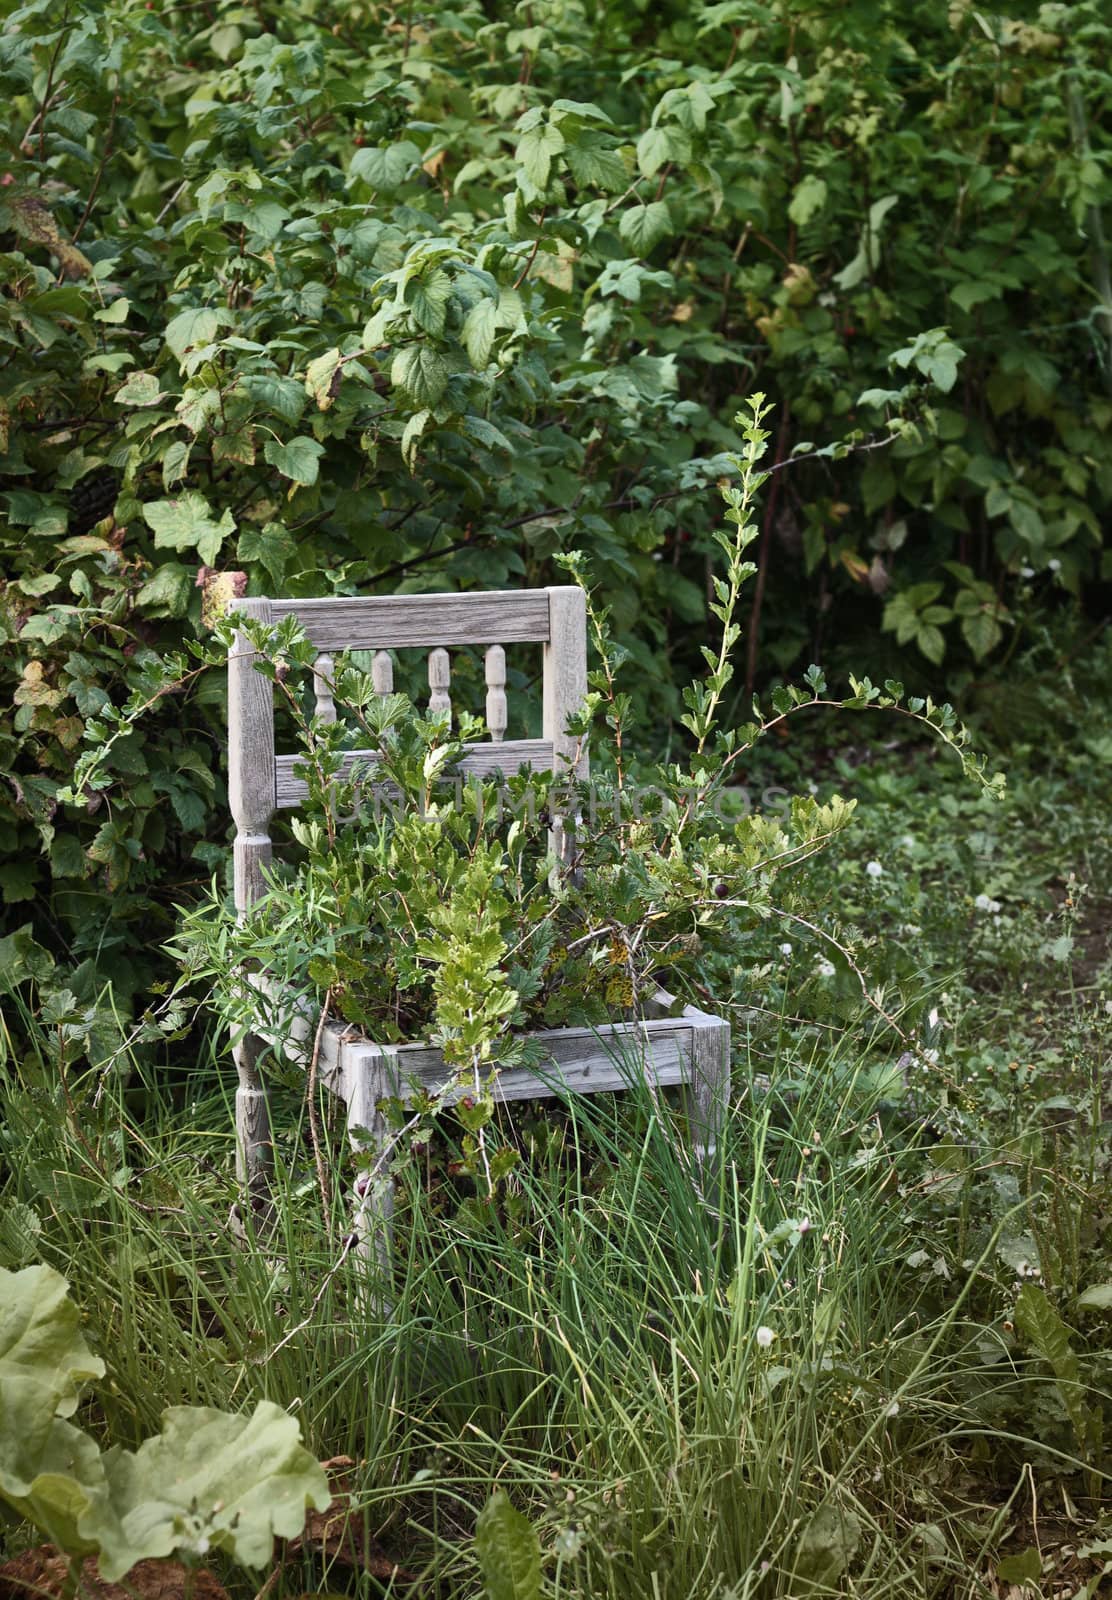 Old wooden chair in wild growing abandoned garden